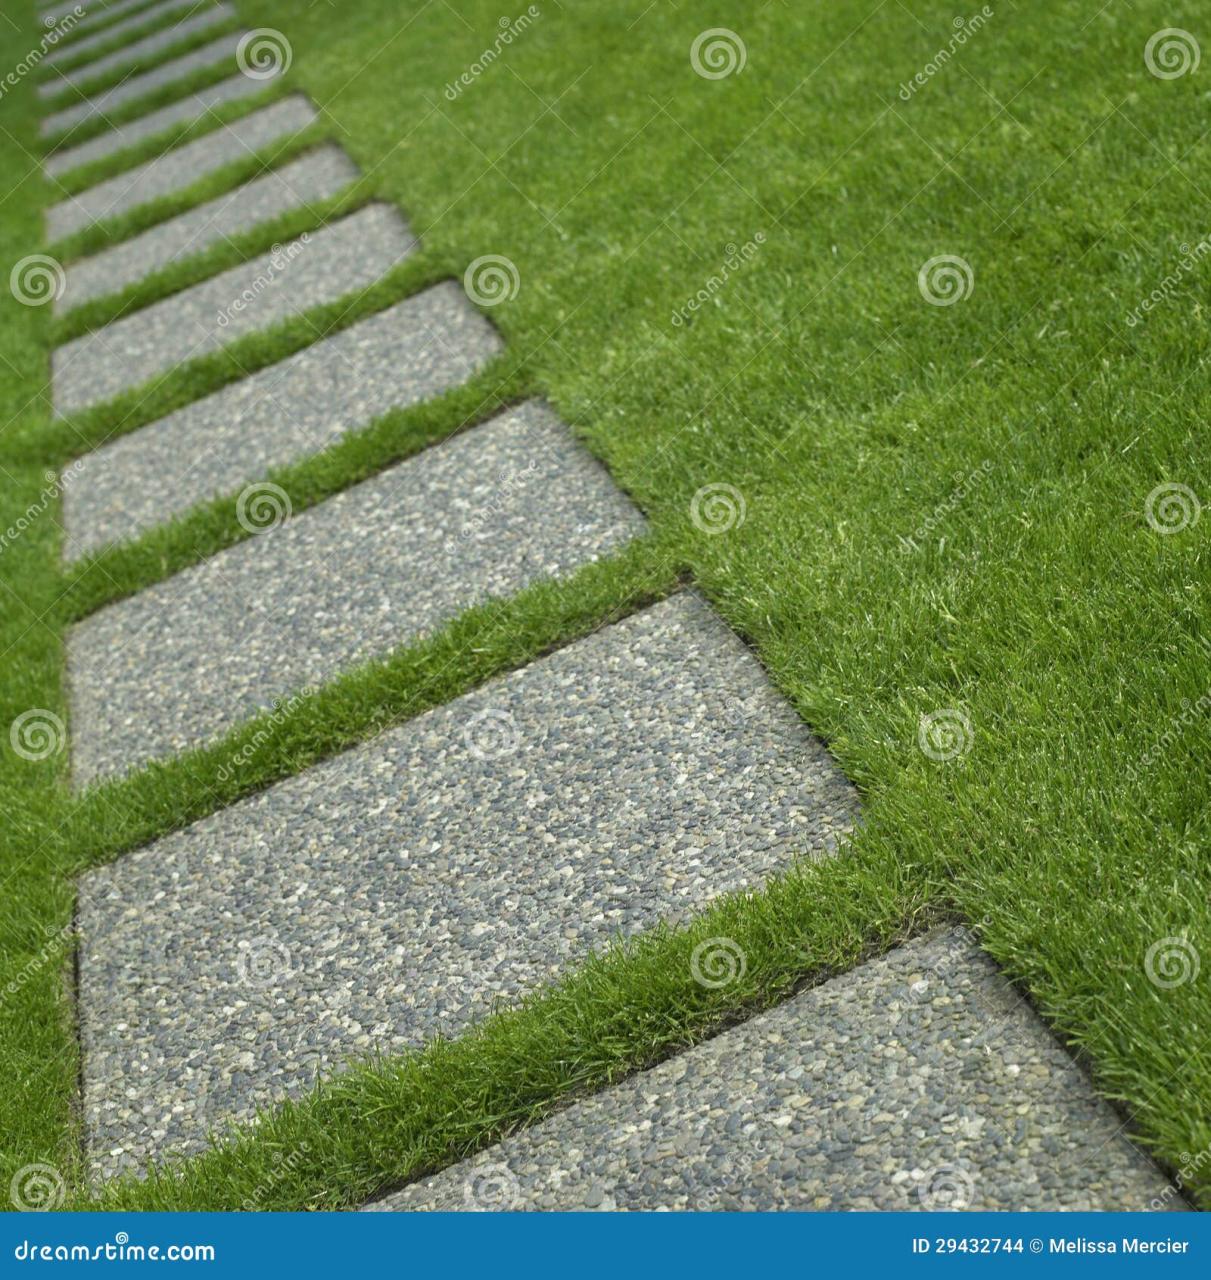 Manicured Grass Stock Images - Image: 29432744